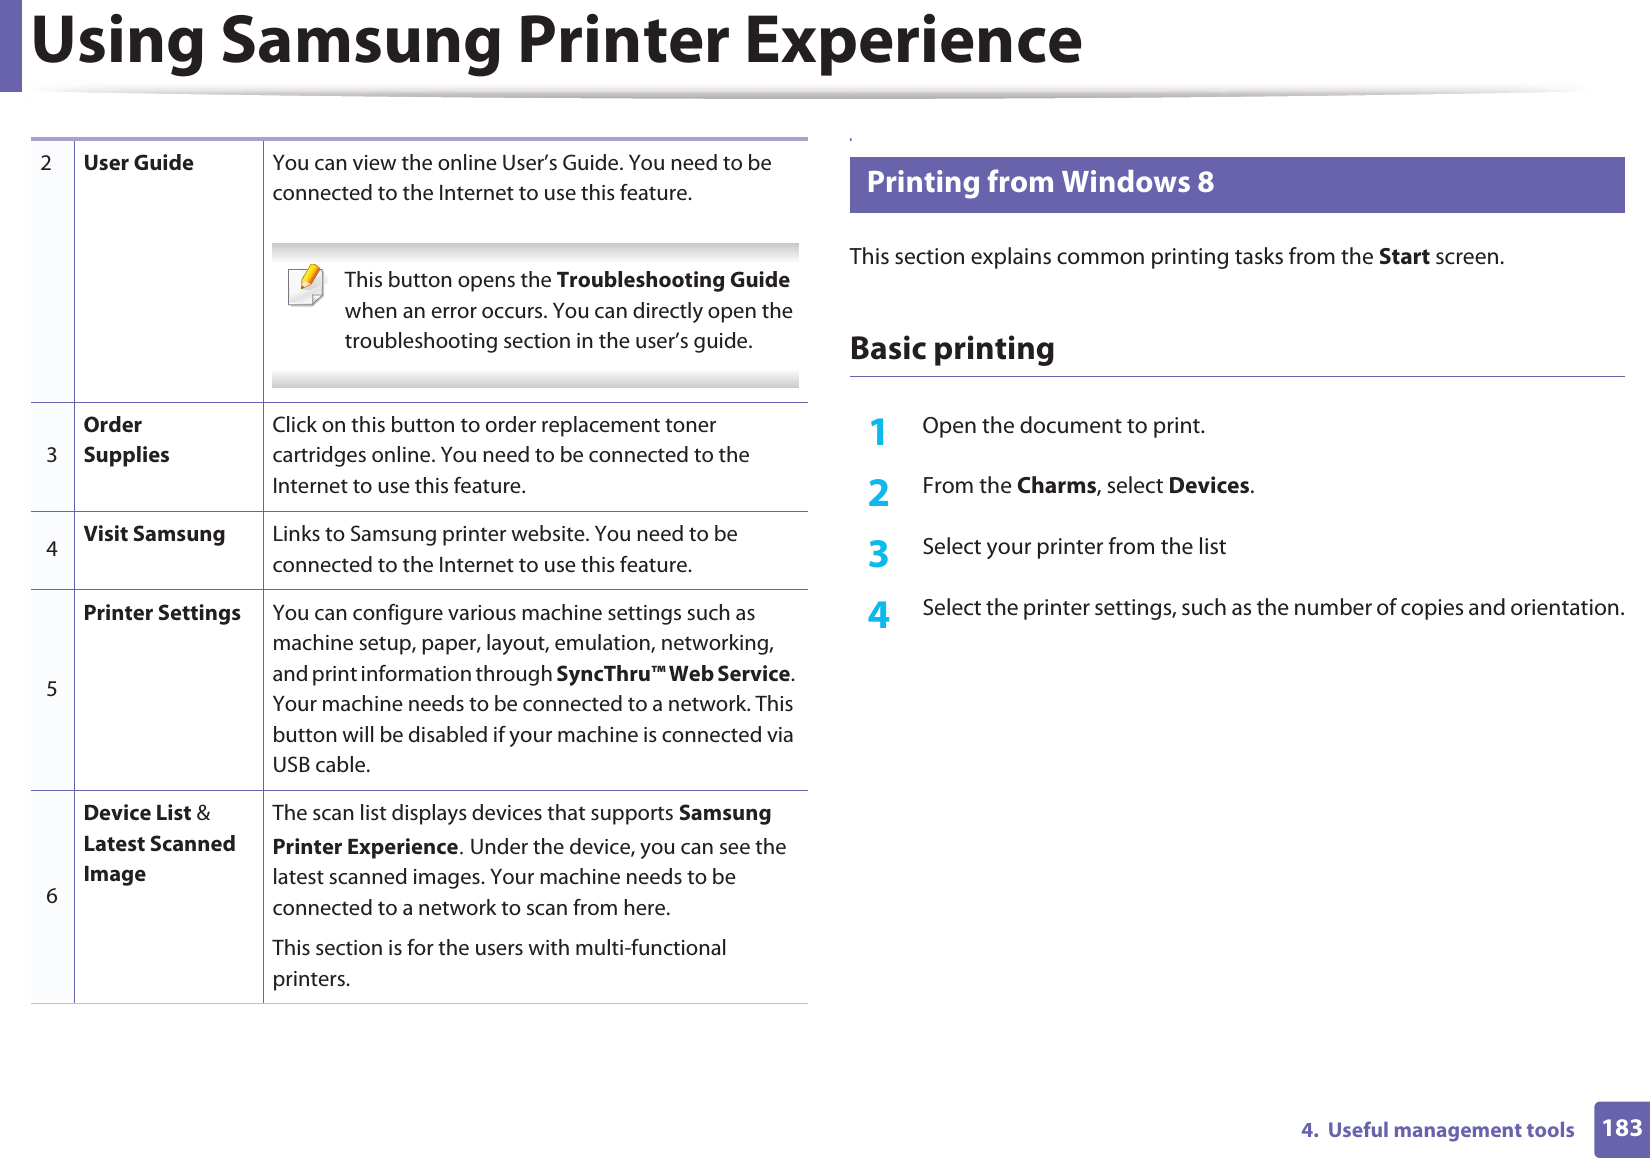 Using Samsung Printer Experience1834.  Useful management tools8 Printing from Windows 8This section explains common printing tasks from the Start screen.Basic printing1Open the document to print.2  From the Charms, select Devices.3  Select your printer from the list4  Select the printer settings, such as the number of copies and orientation.2User Guide You can view the online User’s Guide. You need to be connected to the Internet to use this feature. This button opens the Troubleshooting Guide when an error occurs. You can directly open the troubleshooting section in the user’s guide.  3Order SuppliesClick on this button to order replacement toner cartridges online. You need to be connected to the Internet to use this feature. 4Visit Samsung Links to Samsung printer website. You need to be connected to the Internet to use this feature.5Printer Settings You can configure various machine settings such as machine setup, paper, layout, emulation, networking, and print information through SyncThru™ Web Service. Your machine needs to be connected to a network. This button will be disabled if your machine is connected via USB cable.6Device List &amp; Latest Scanned ImageThe scan list displays devices that supports Samsung Printer ExperienceU Under the device, you can see the latest scanned images. Your machine needs to be connected to a network to scan from here. This section is for the users with multi-functional printers.